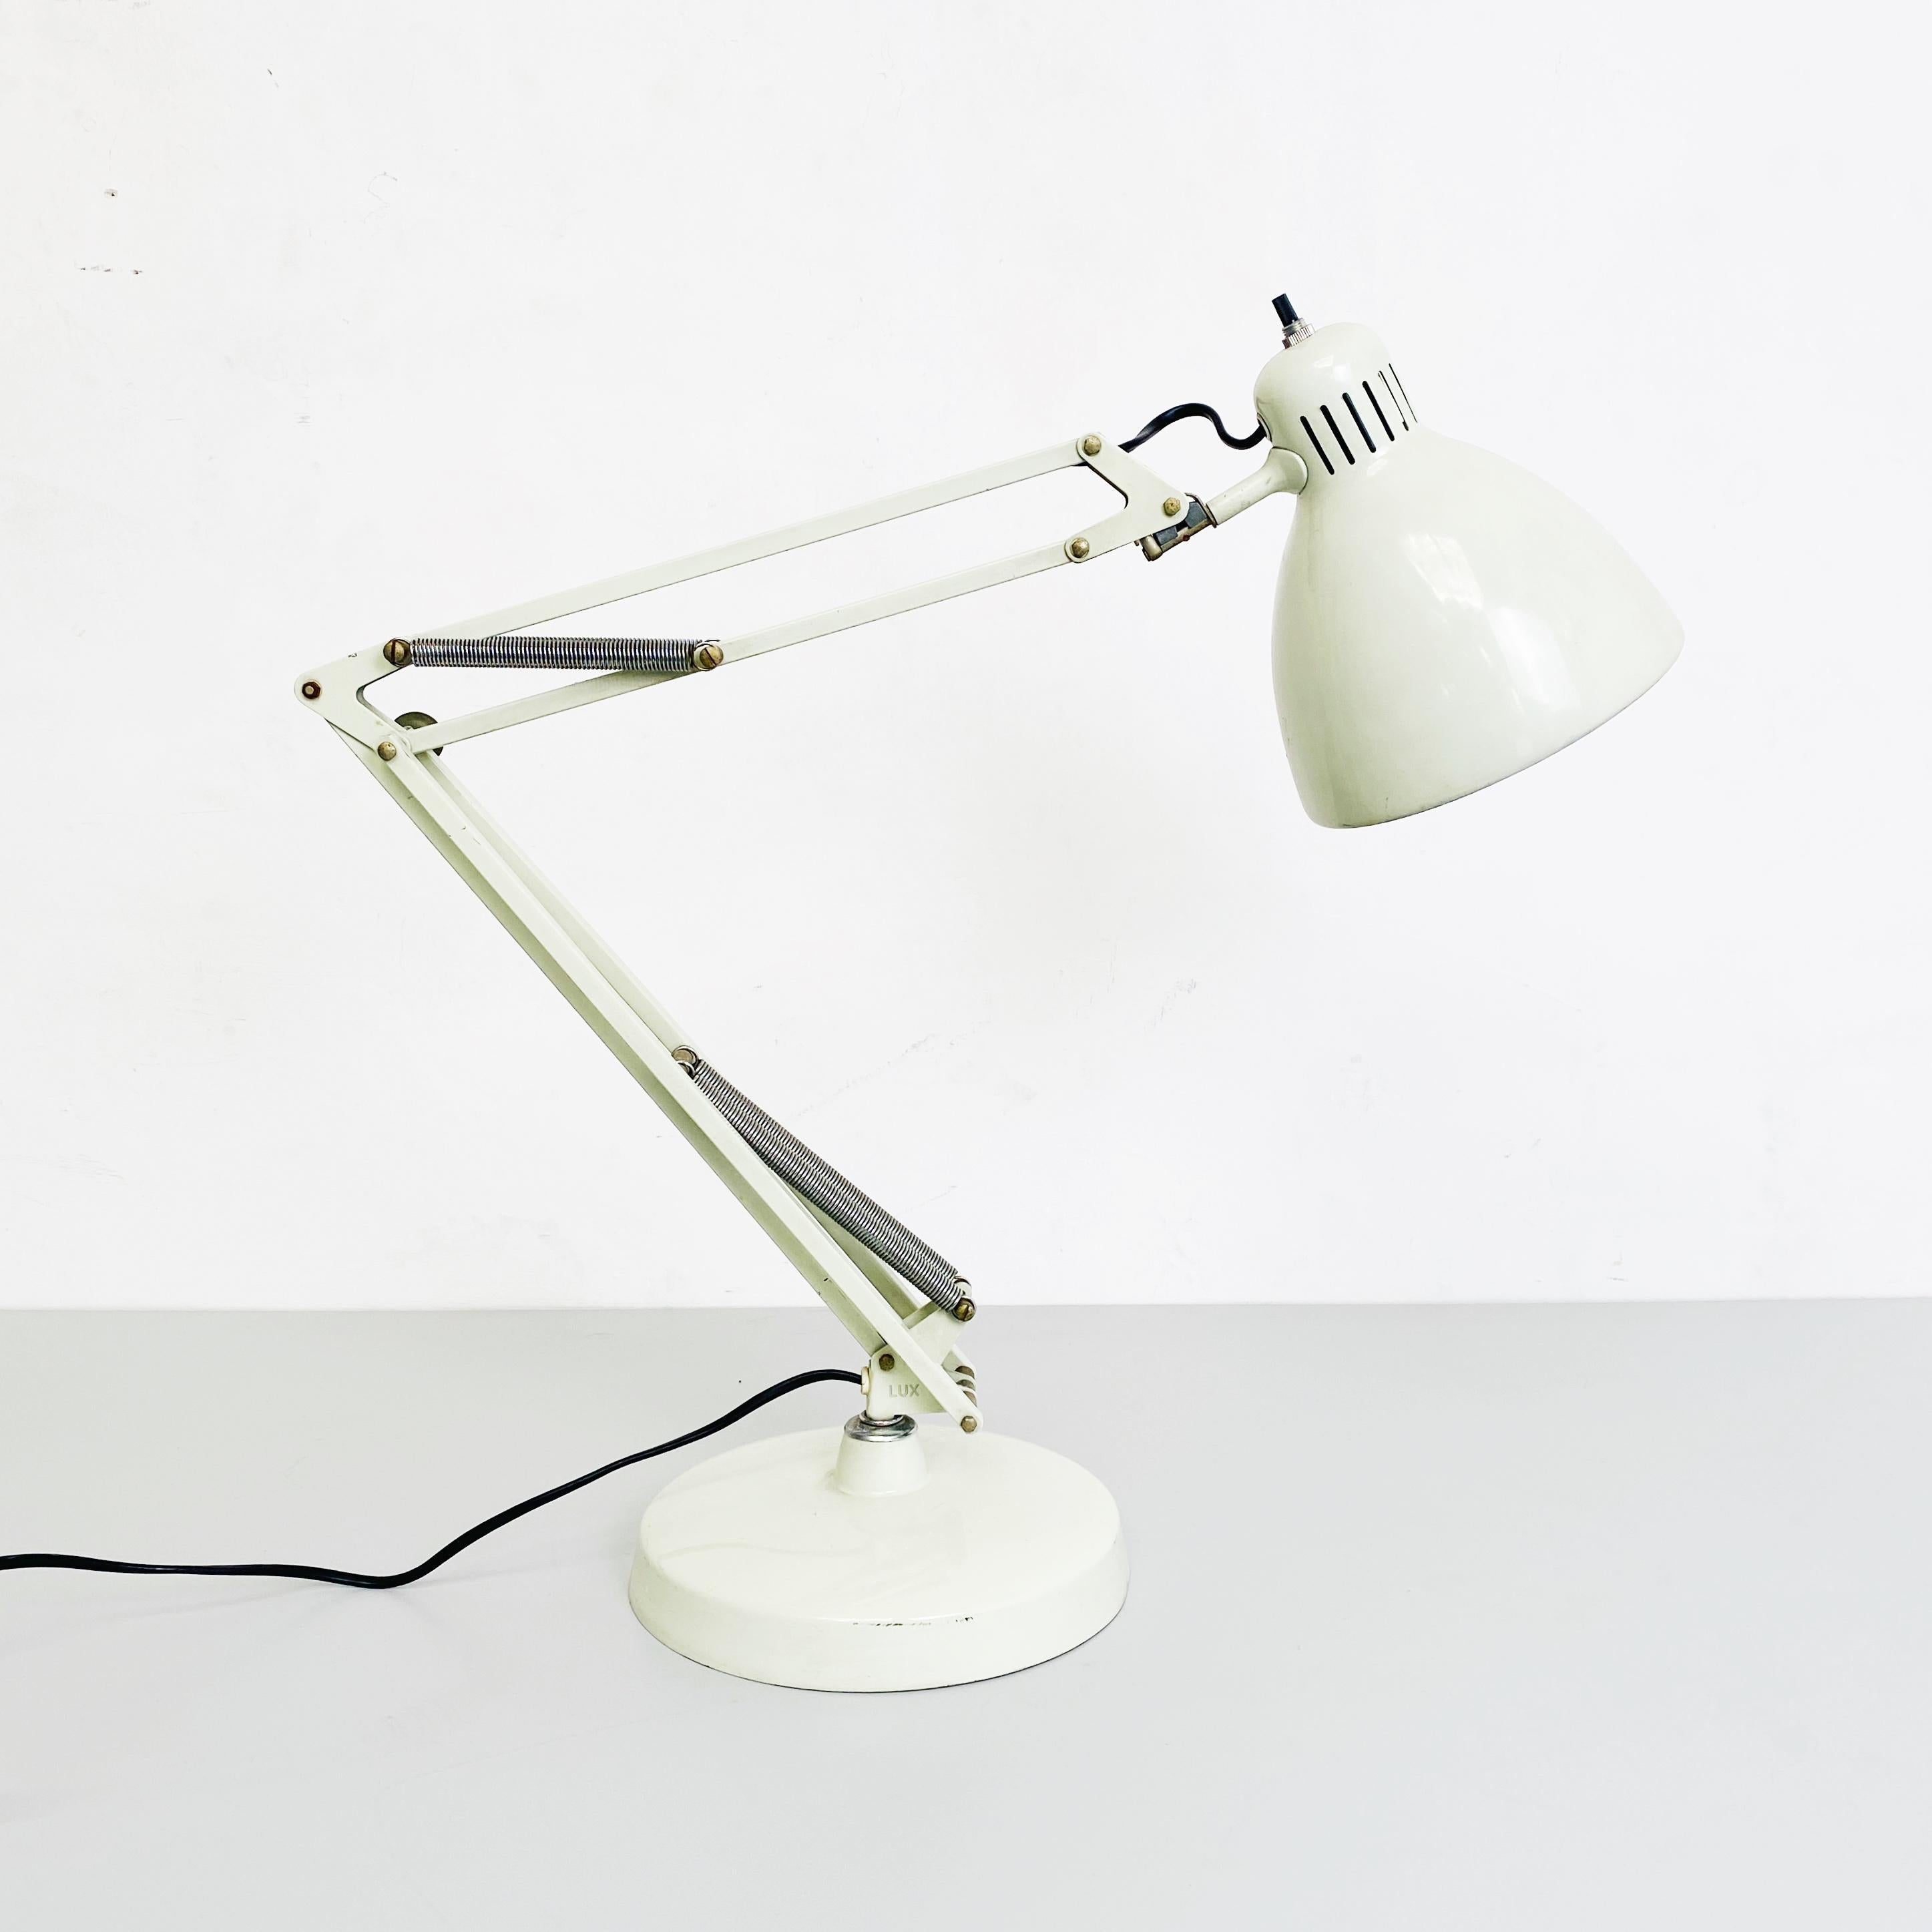 Norwegian white metal Naska Loris table lamp by Jac Jacobsen for Luxo, 1950s
Adjustable table lamp Naska Loris, in white enamelled metal with round base with structure and lampshade adjustable in any position. 
Produced by Luxo in 1950s. but